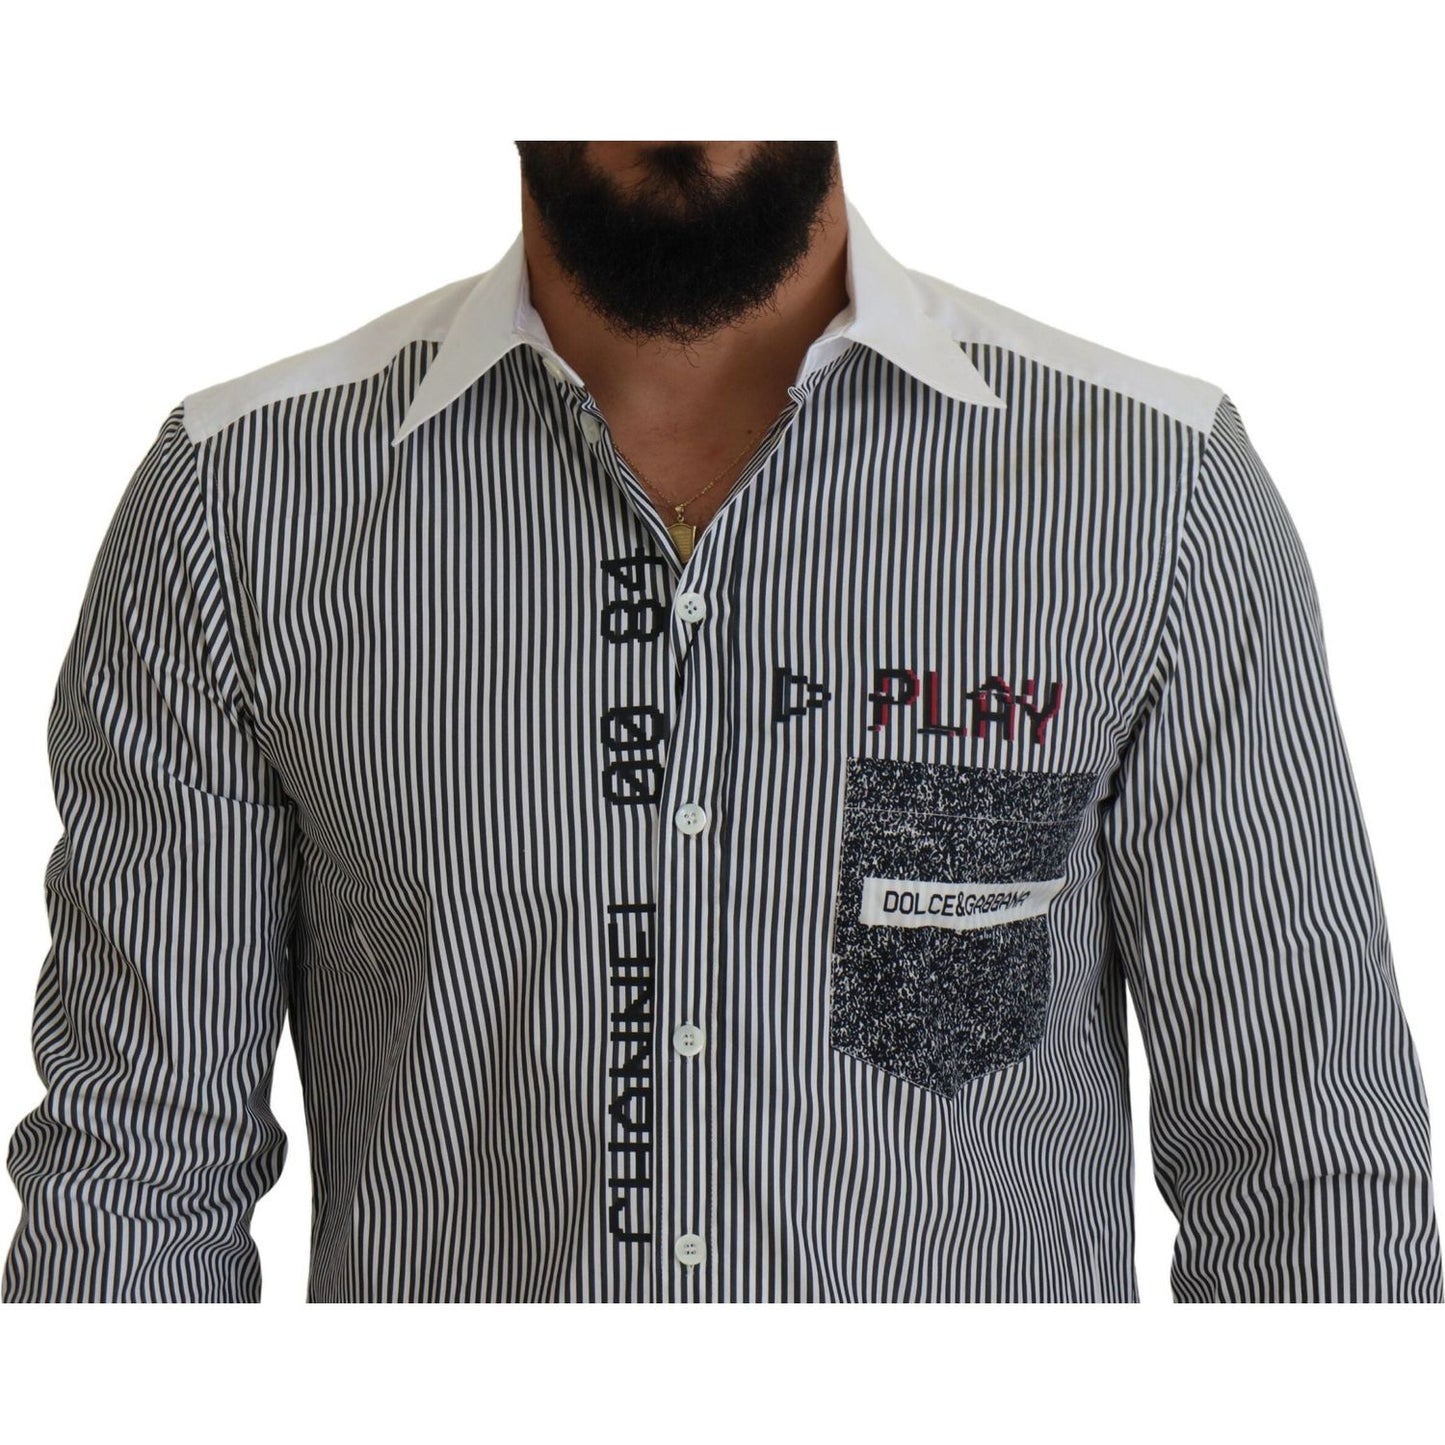 Dolce & Gabbana Slim Fit Striped Casual Shirt with Channel Motive gray-white-striped-slim-fit-shirt